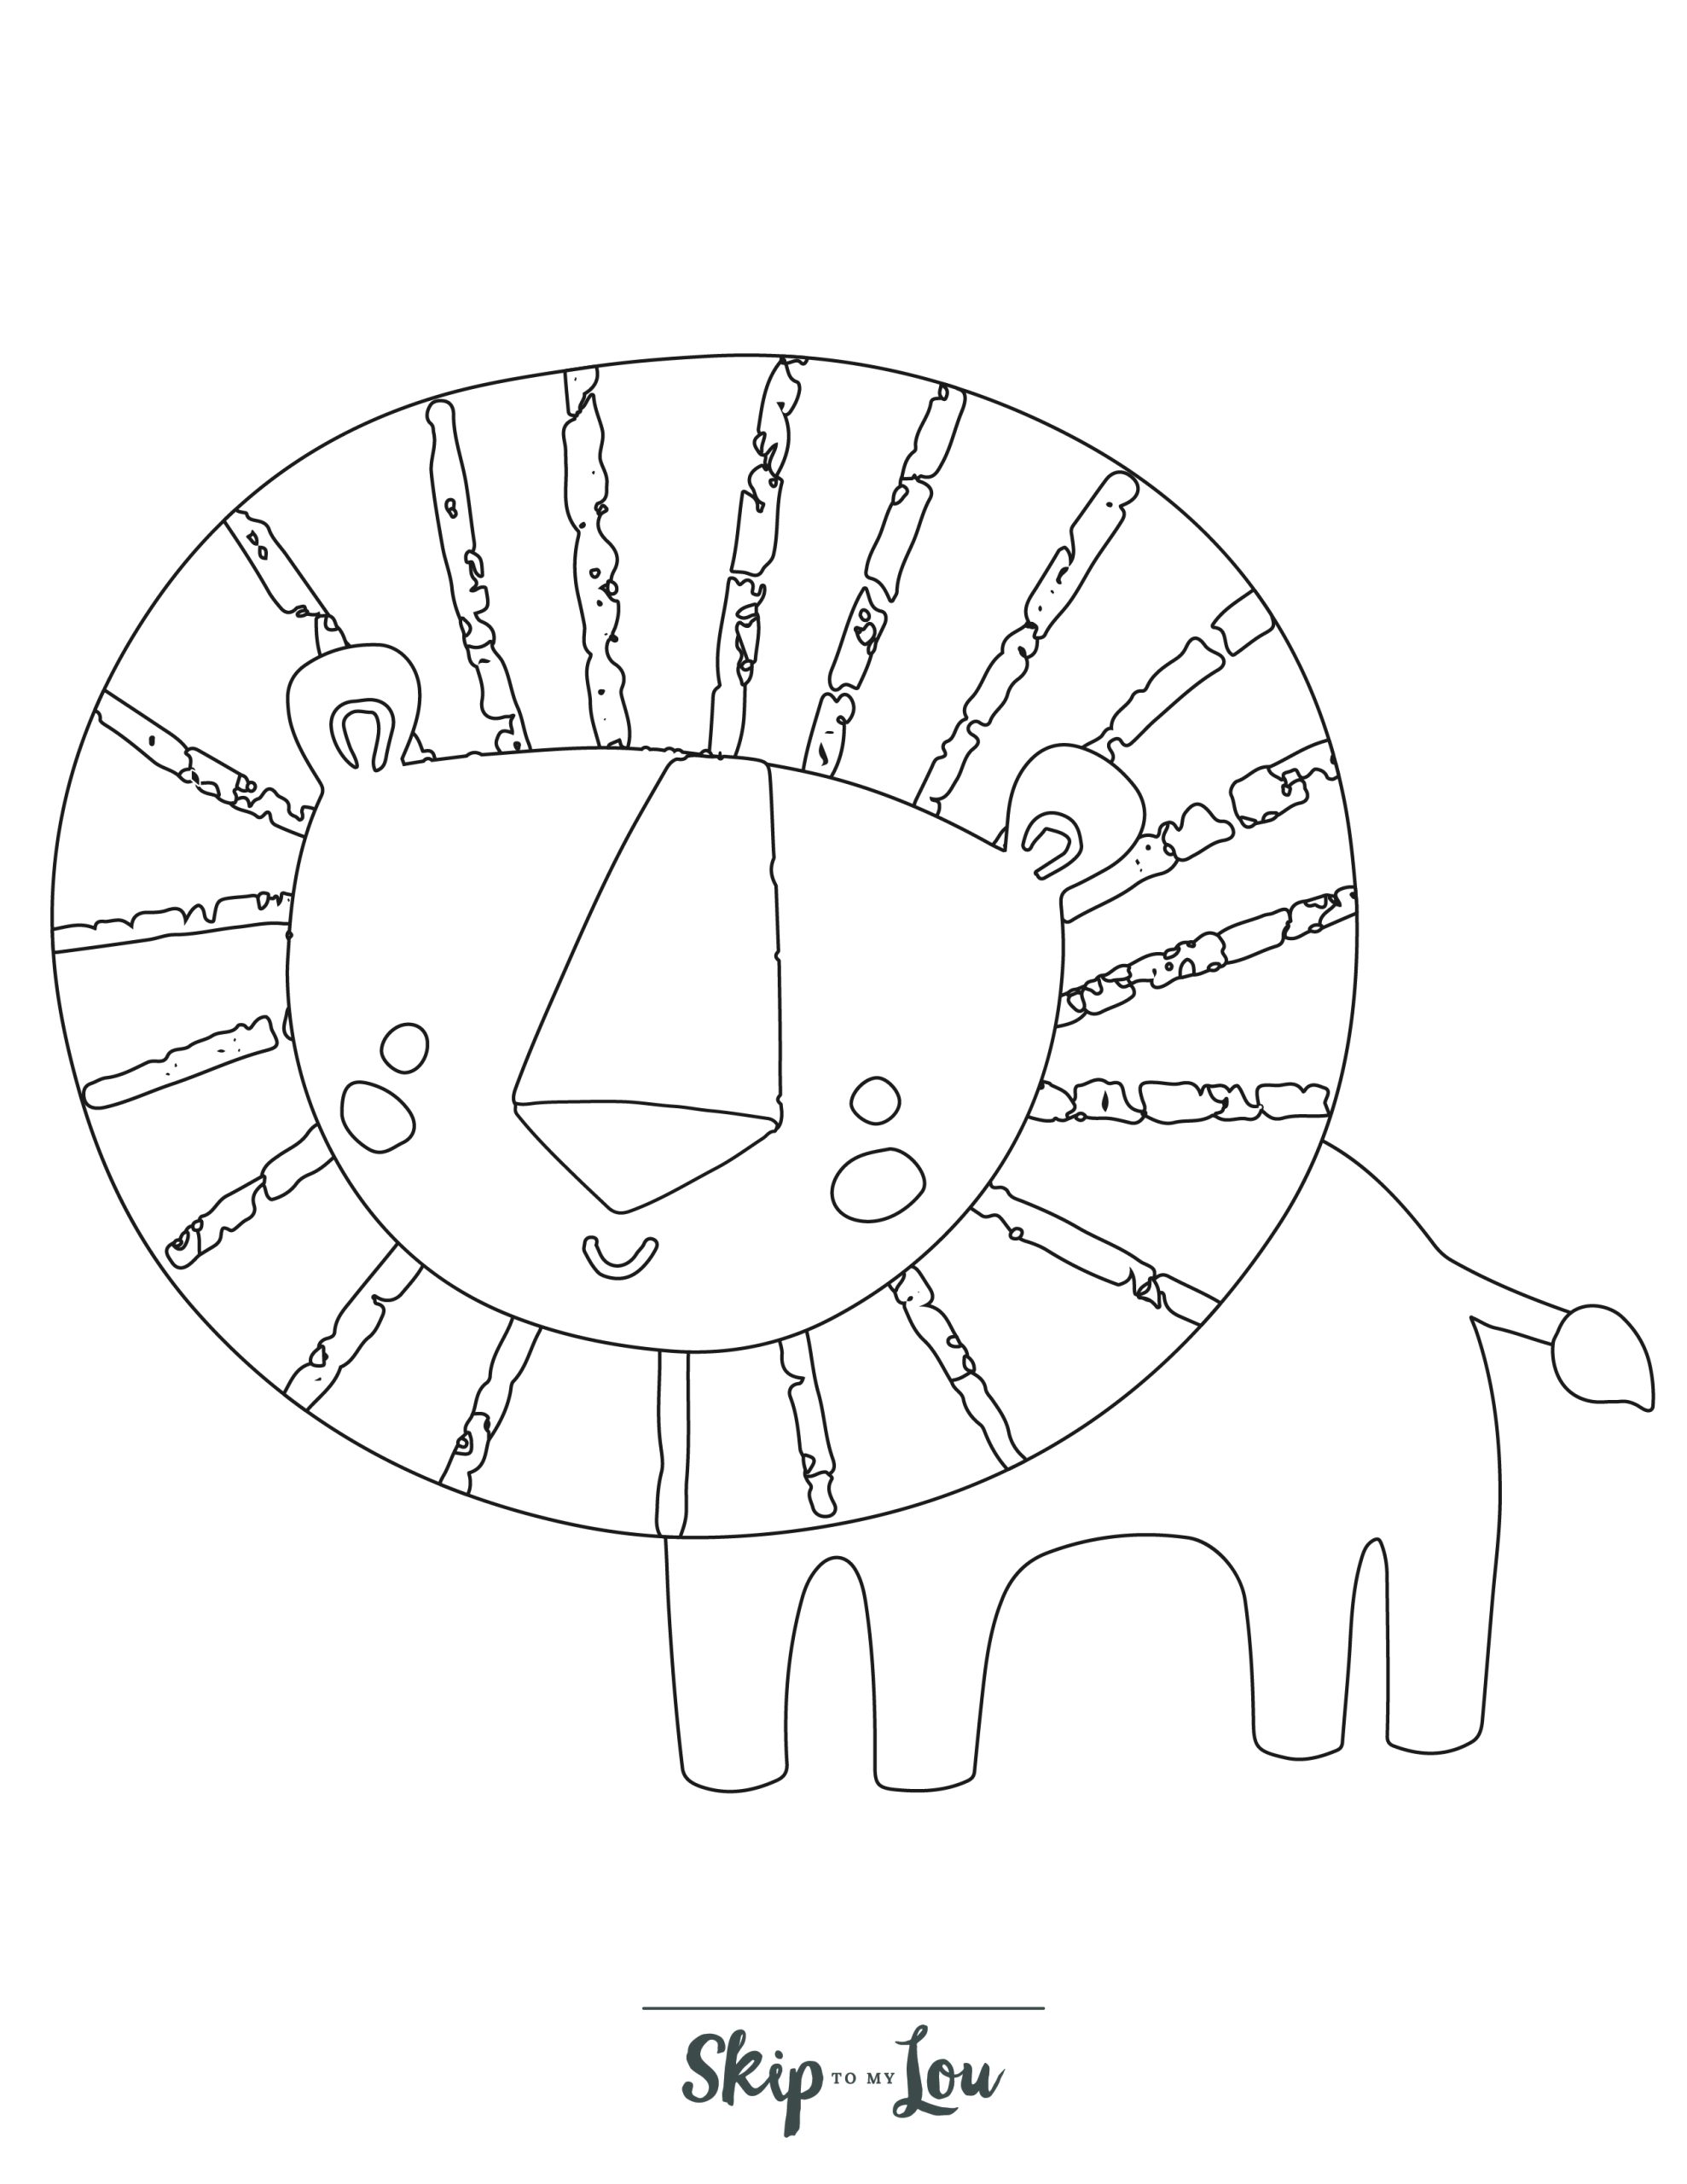 Skip to my Lou - Preschool Coloring Pages - Line drawing of a lion with a big mane